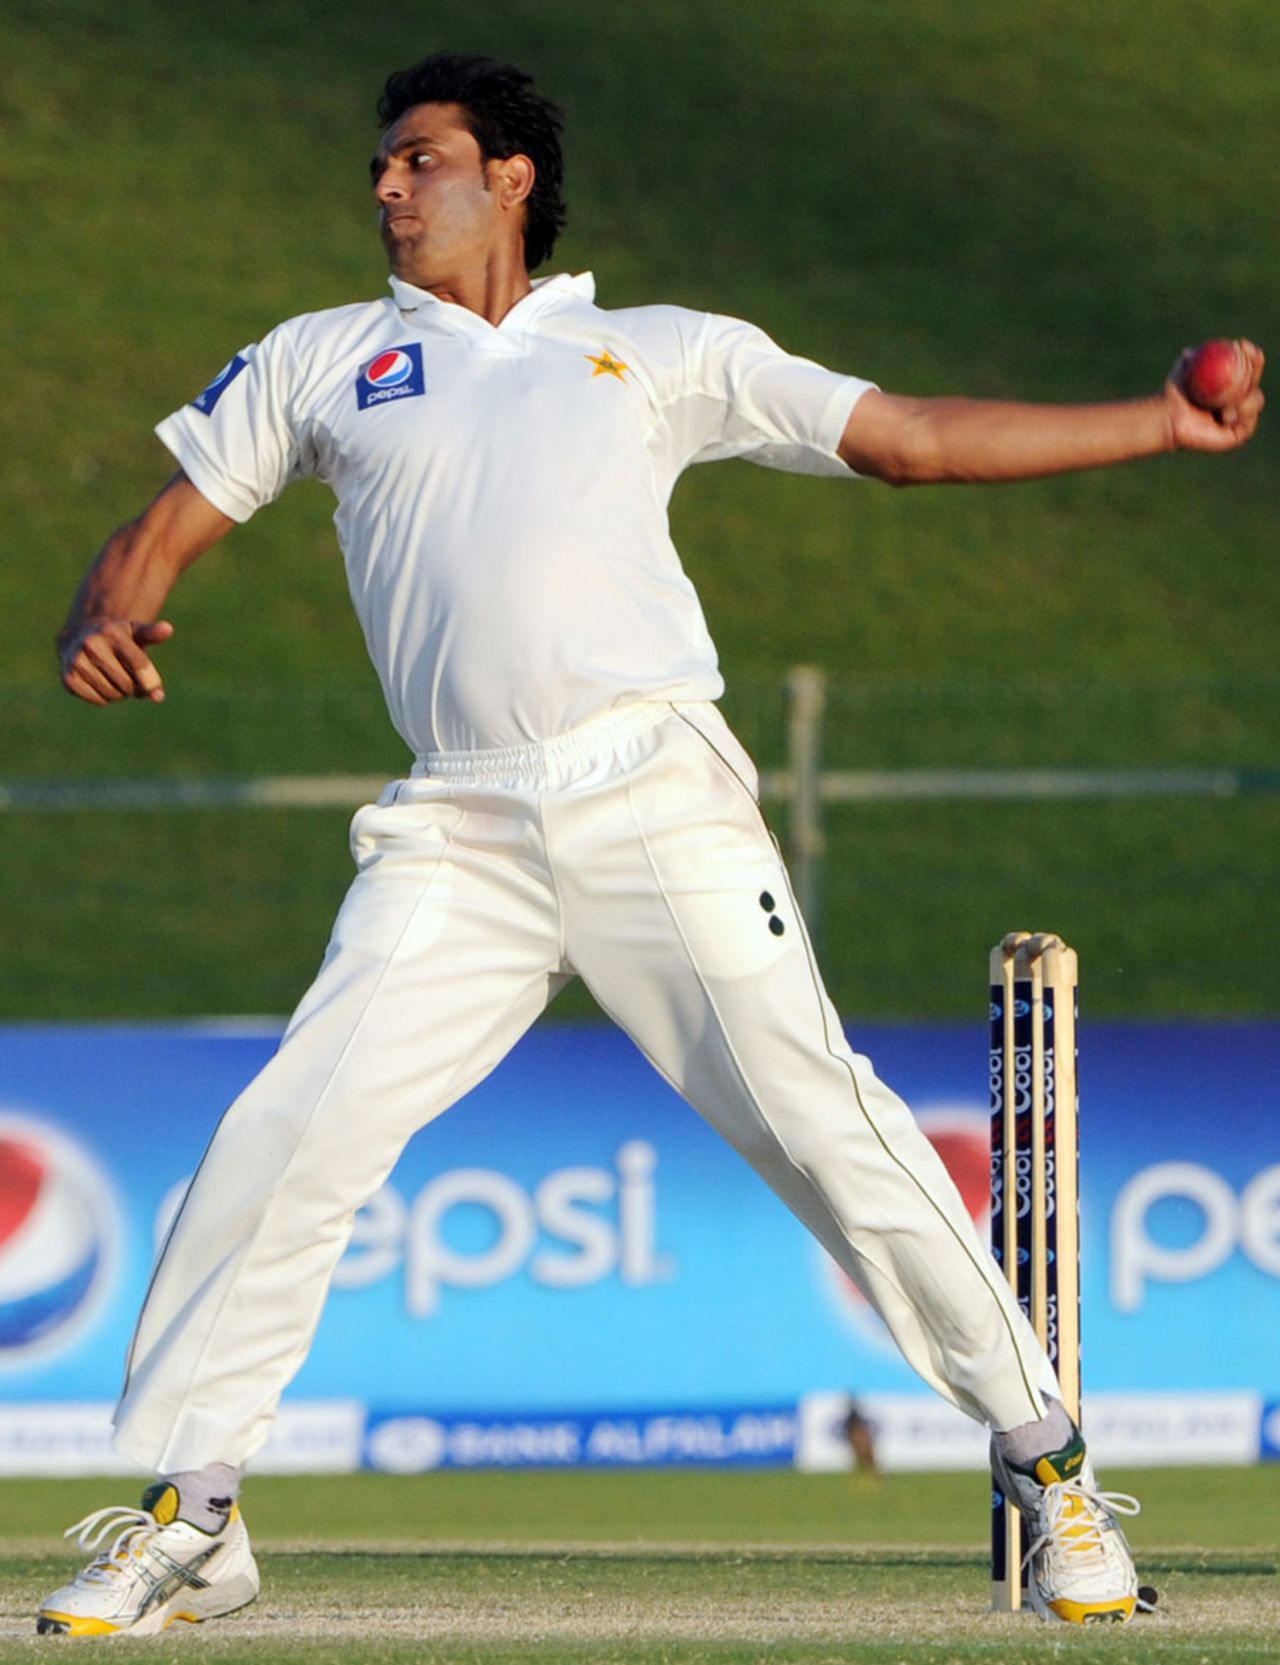 Abdur Rehman delivers a ball in his three-wicket spell, Pakistan v South Africa, 2nd Test, Abu Dhabi, 4th day, November 23, 2010